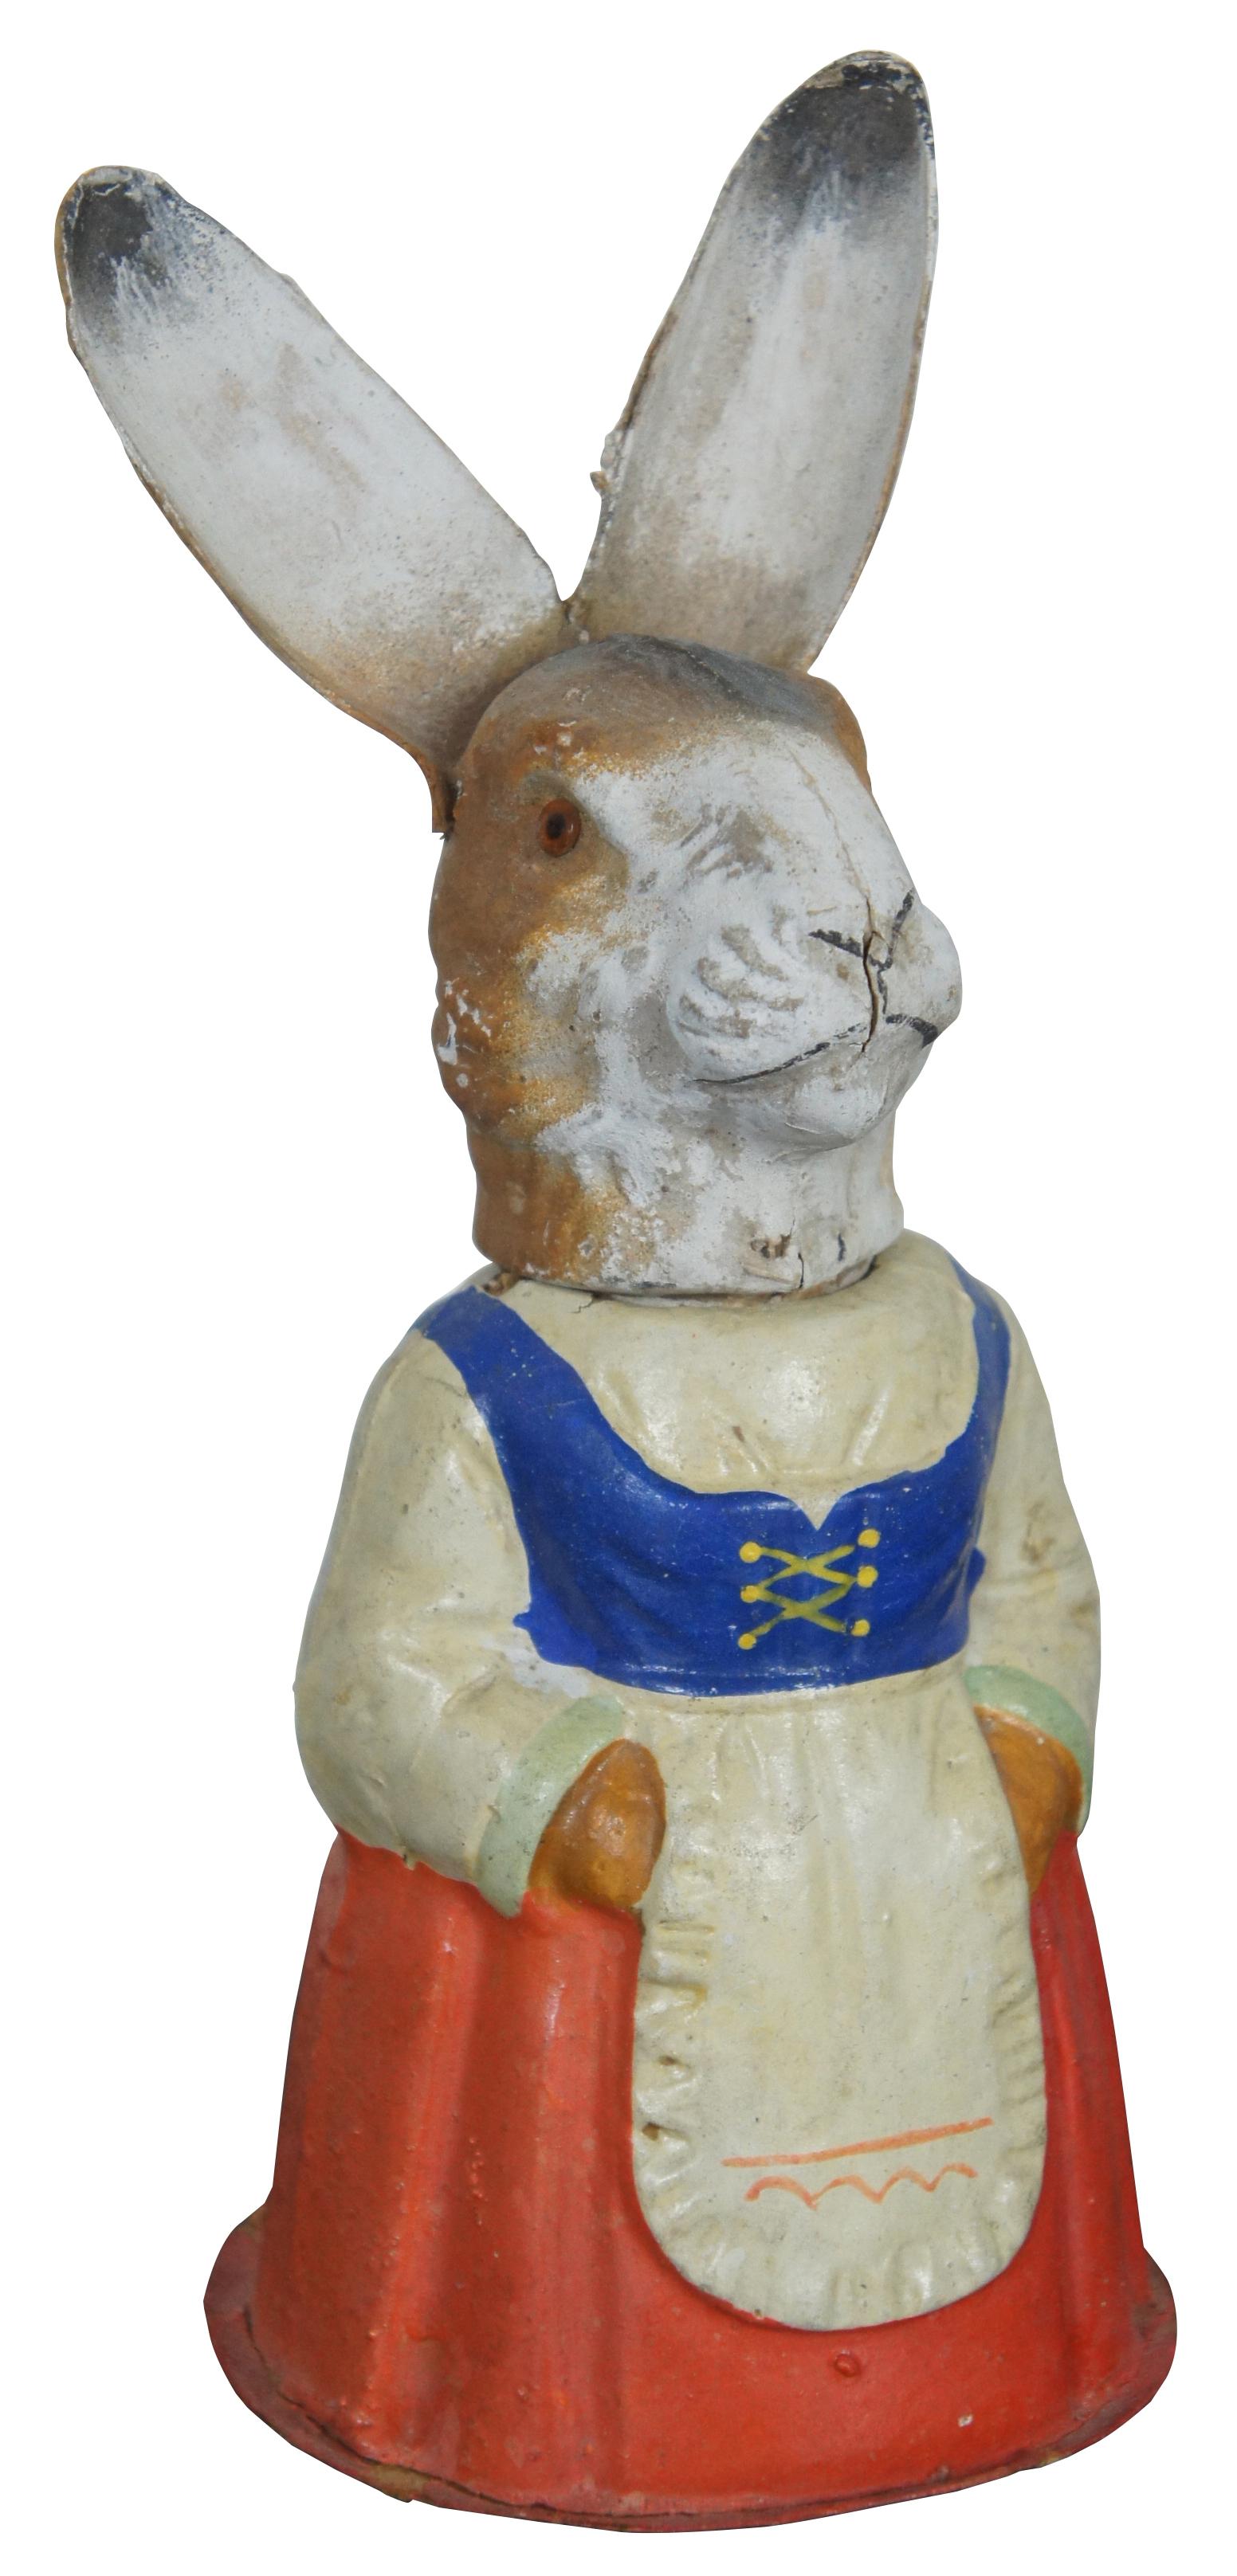 Pair of antique German paper mâché, painted folk art rabbit / Easter bunny Mr. & Mrs. figurines candy containers dressed in red, yellow and blue outfits and housed in a wood and glass display case.

Measures: Case: 12.5” x 7” x 12.25” / Rabbits: